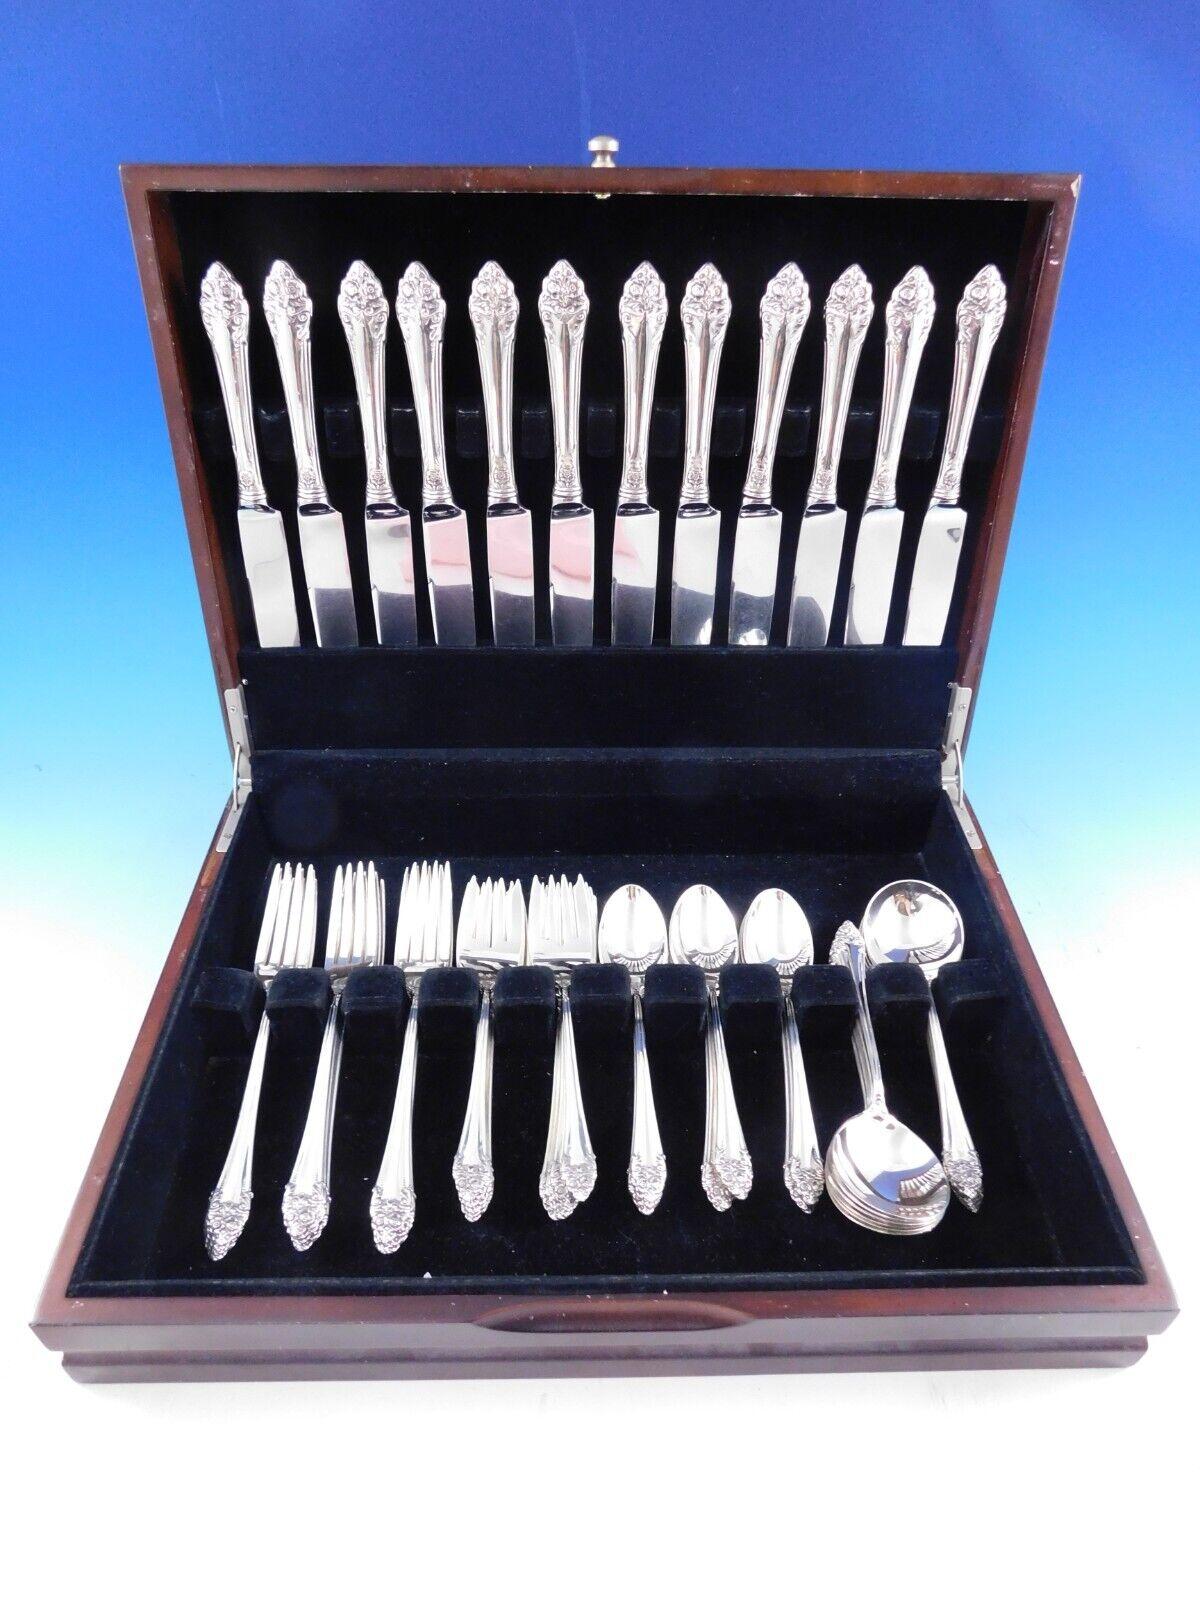 Fragrance by Reed & Barton sterling silver flatware set - 60 pieces. This set includes:

12 Knives, 9 1/8